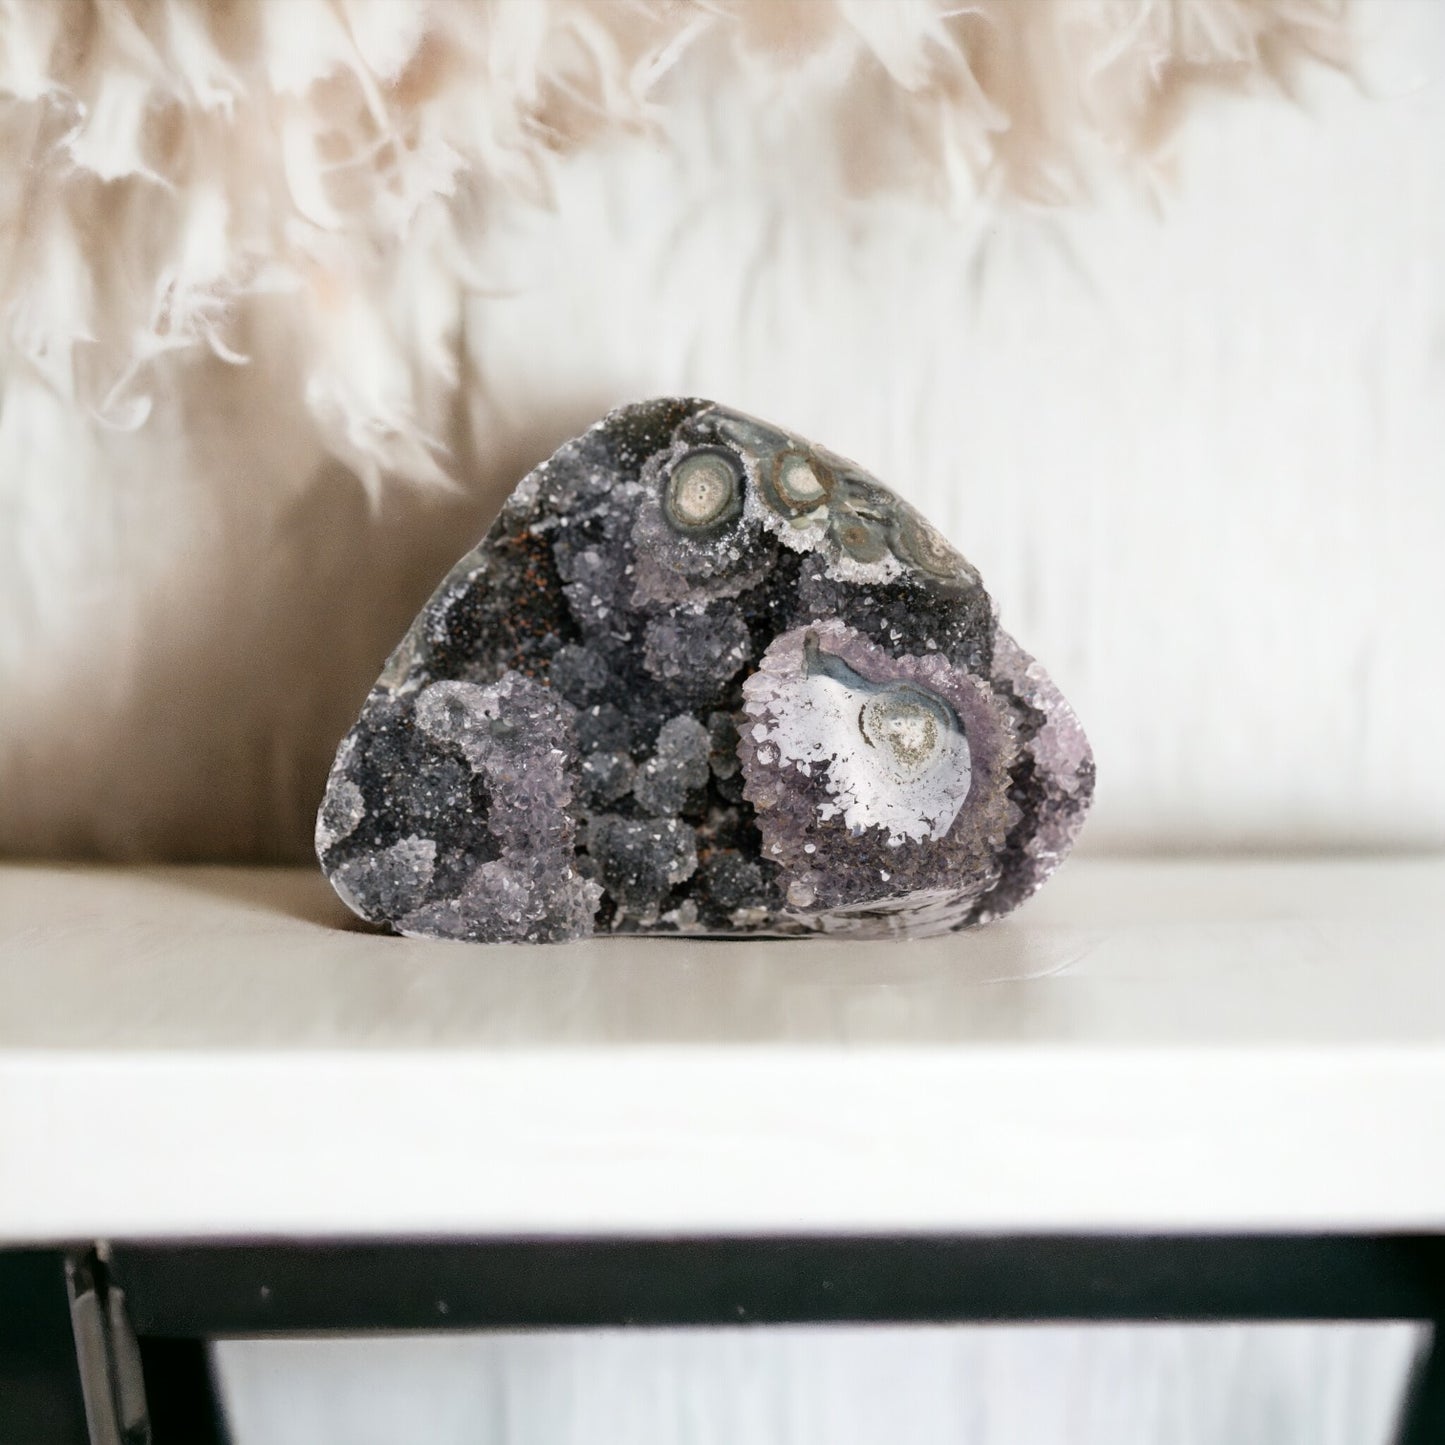 Raw AAA+ Amethyst Crystal Geode – 0.76 lbs, 3.5x2.5x2.5 in Exclusive and Rare Rock from Uruguay